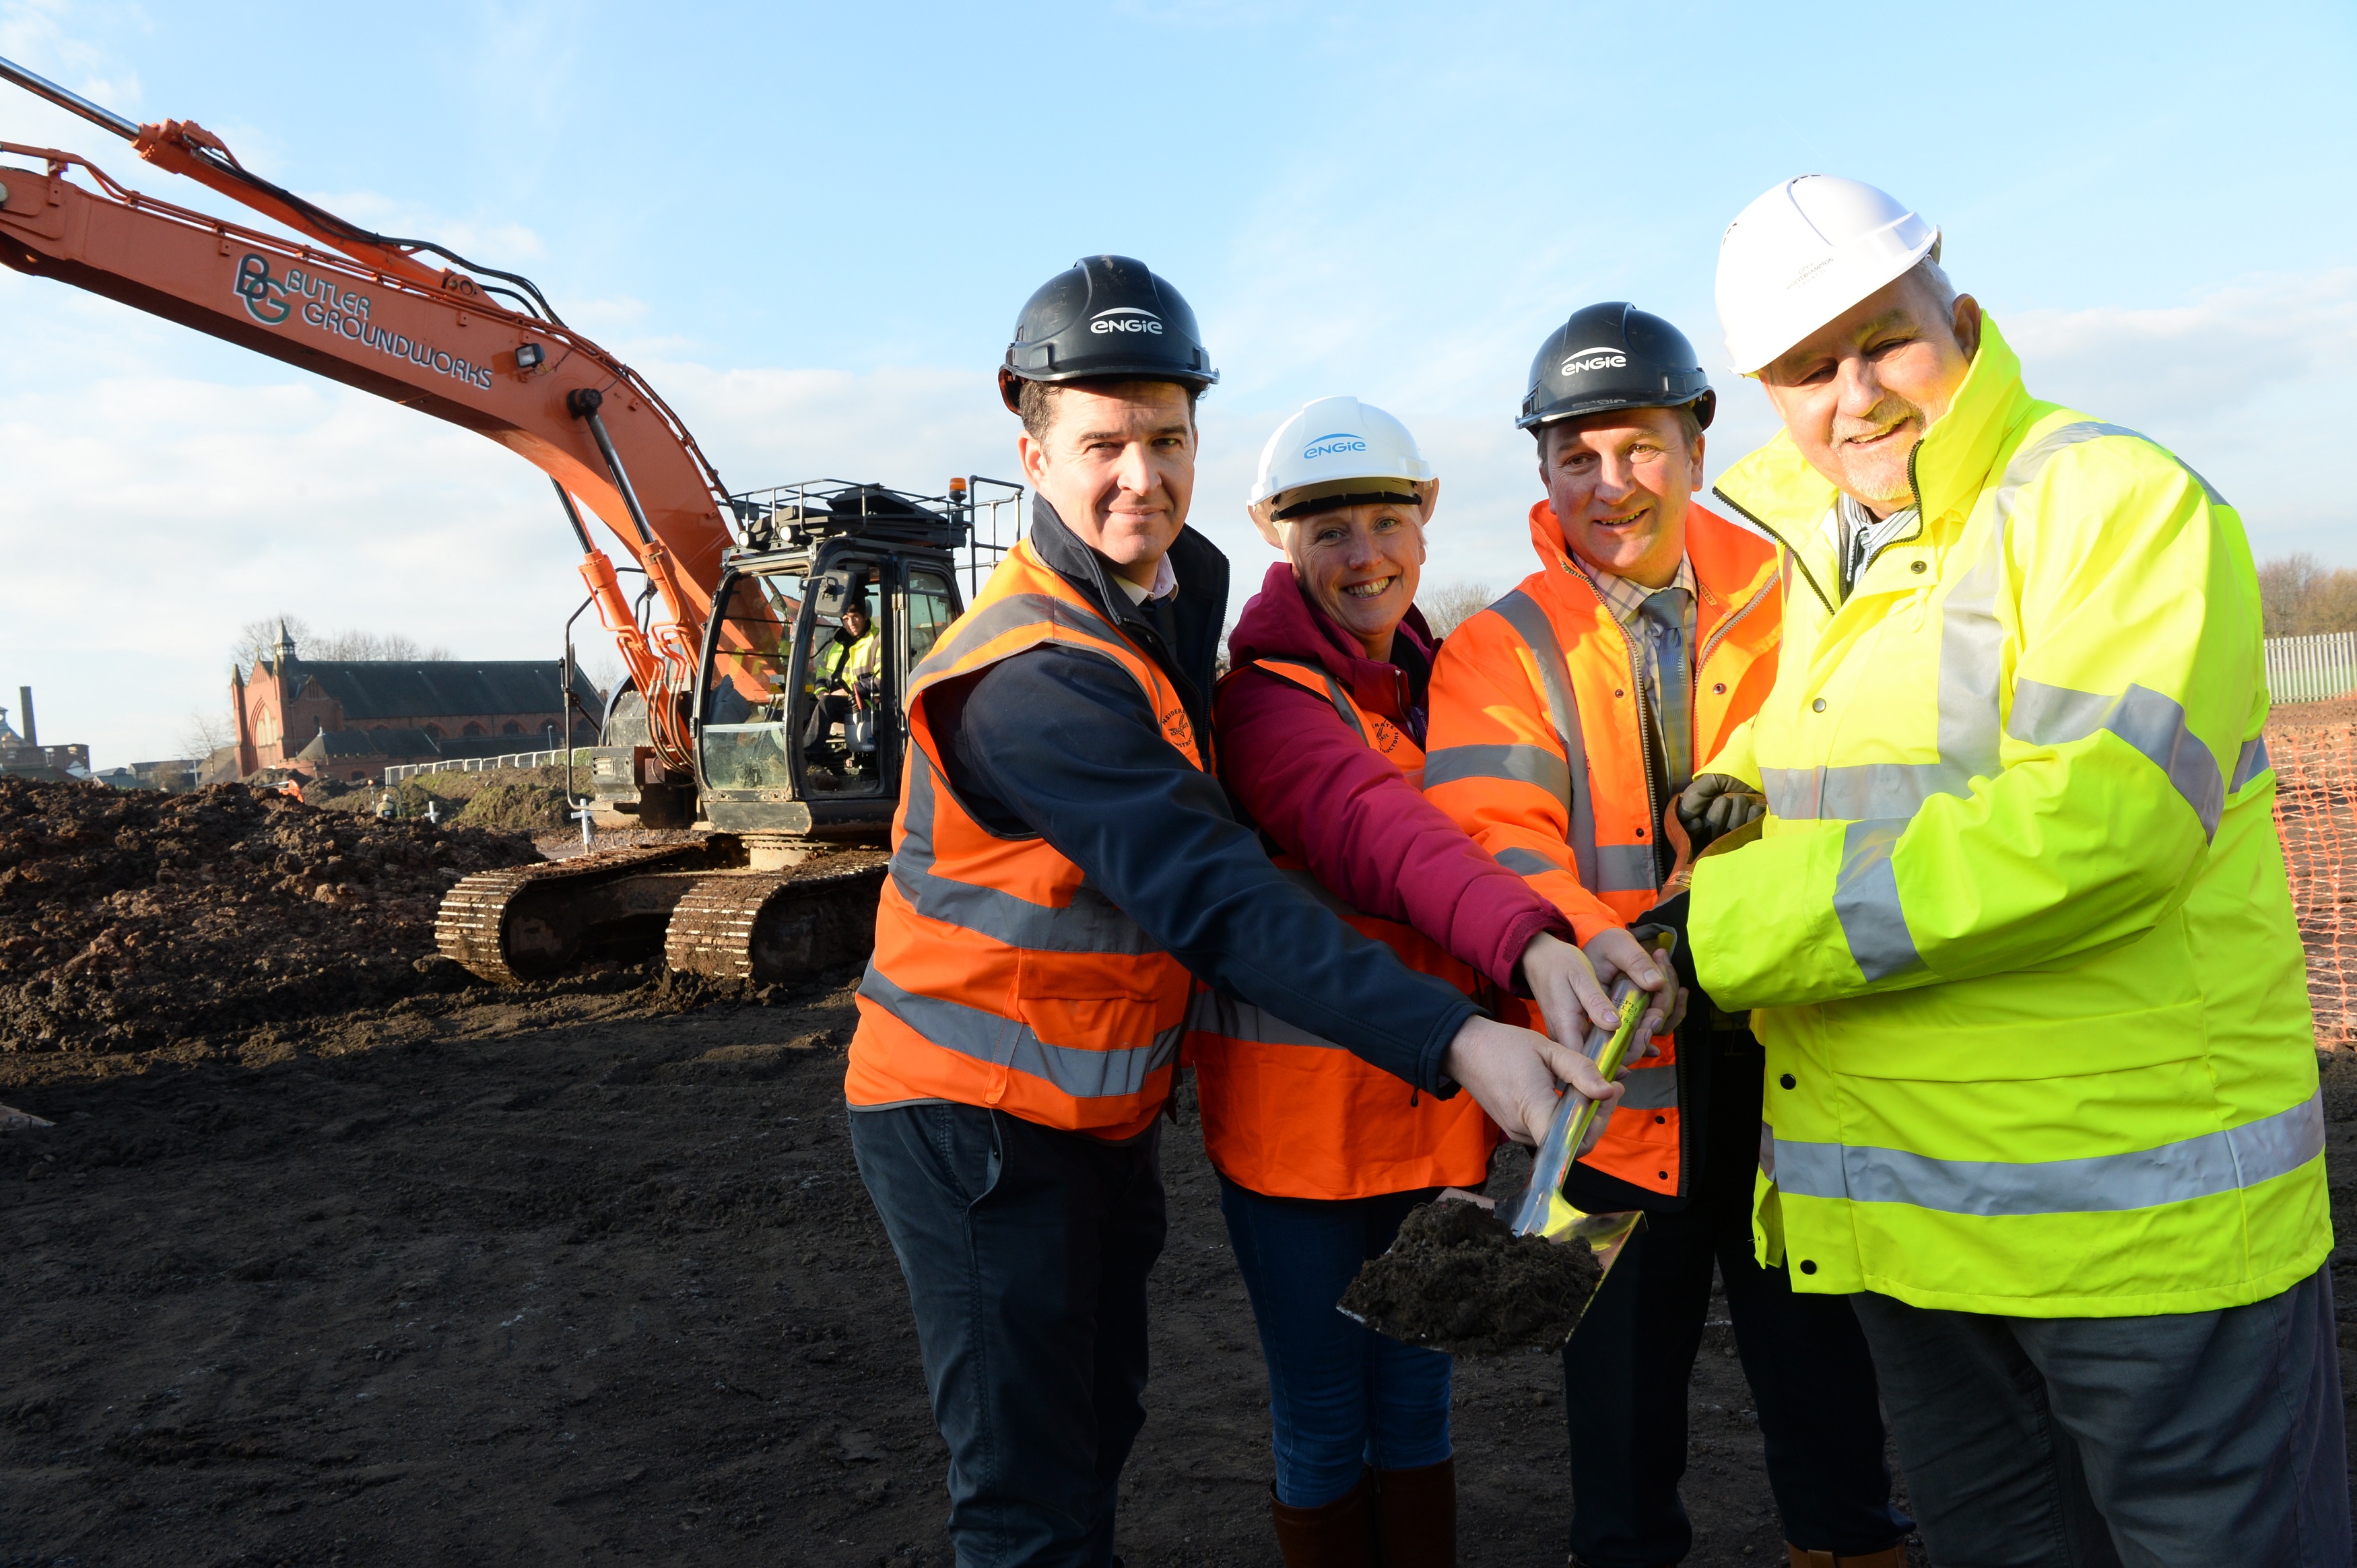 Work starts on new council homes development